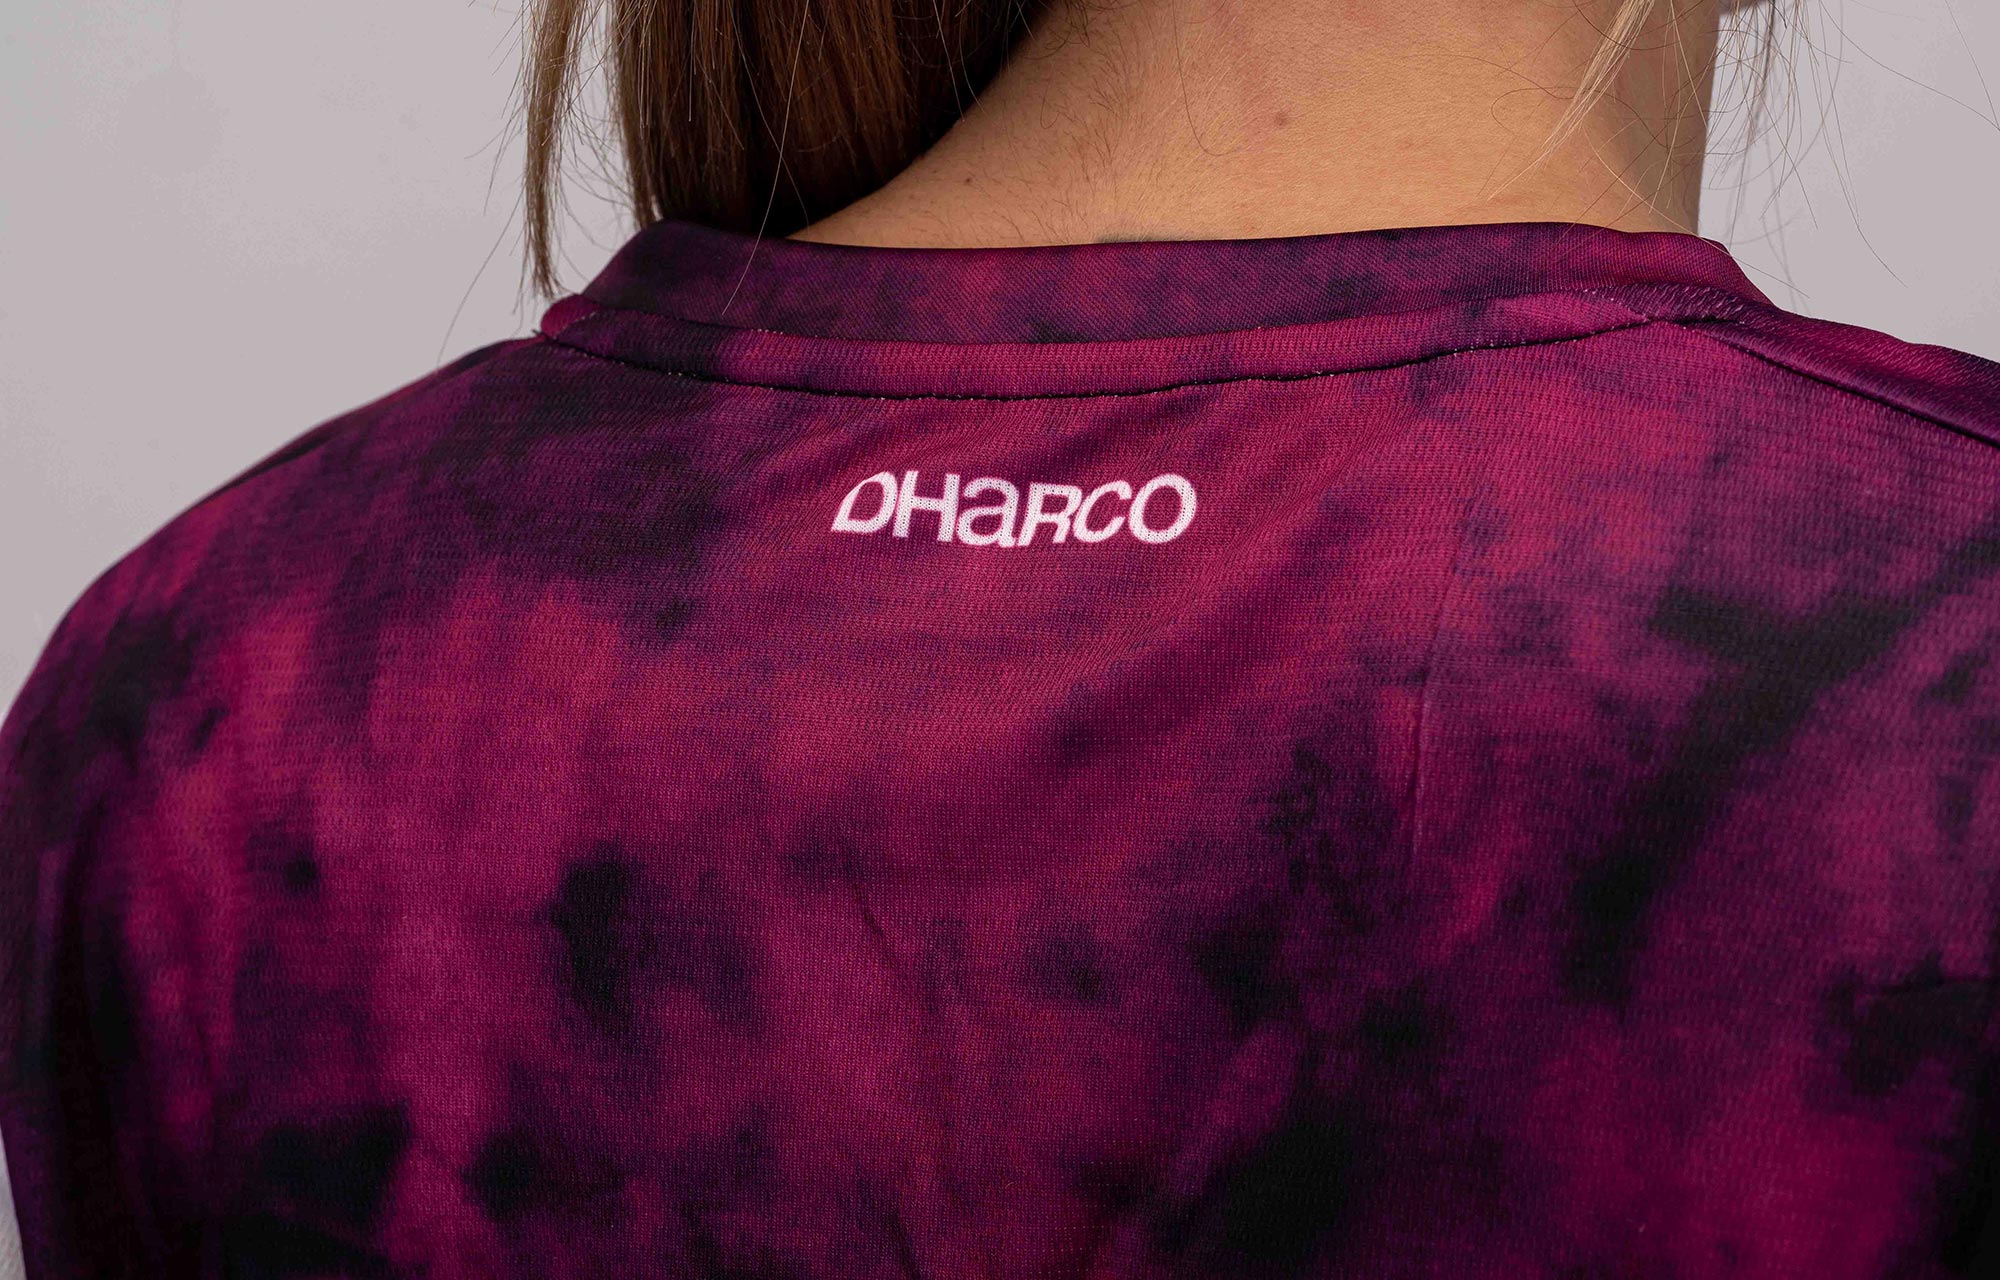 COMMENCAL-DHARCO LONG SLEEVE WOMEN TEAM REPLICA JERSEY PINK image number 4